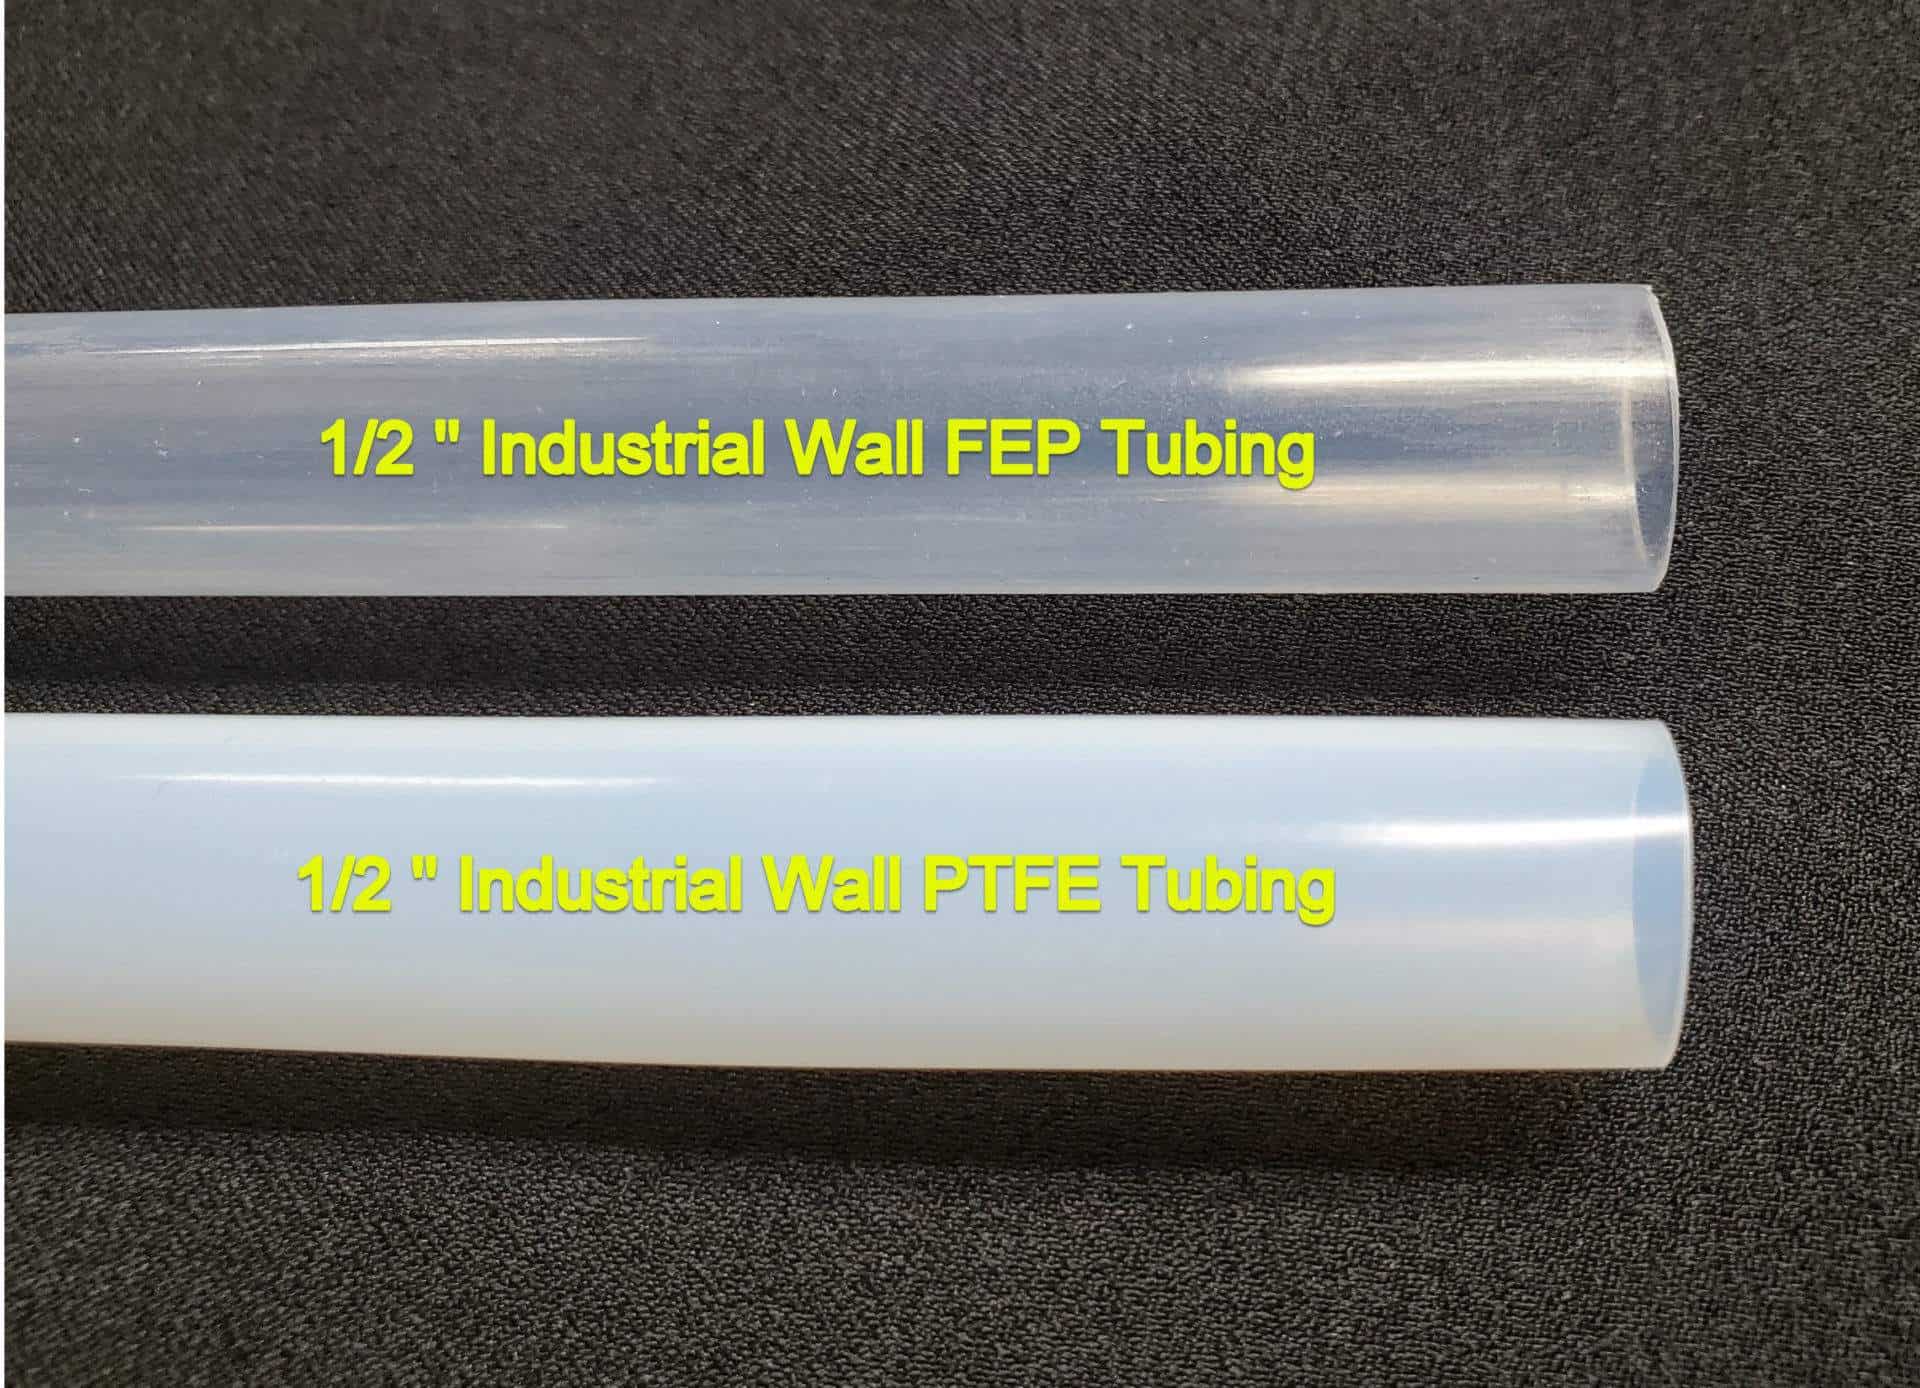 Comparing Visual Differences Between PTFE and FEP Tubing